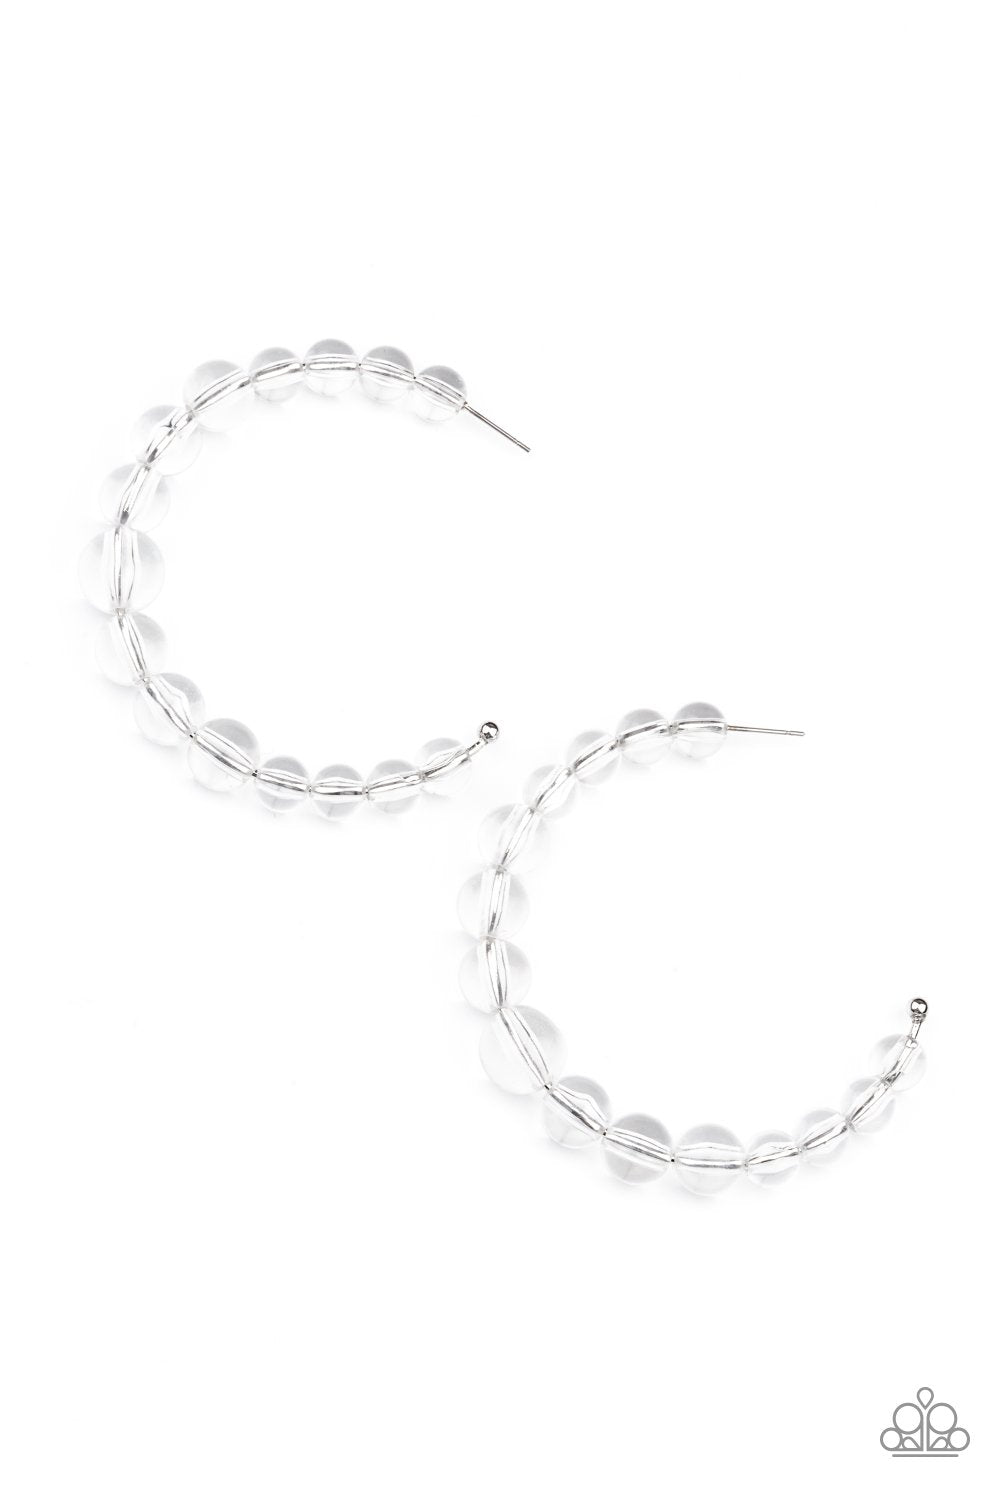 In The Clear White Hoop Earrings - Paparazzi Accessories- lightbox - CarasShop.com - $5 Jewelry by Cara Jewels